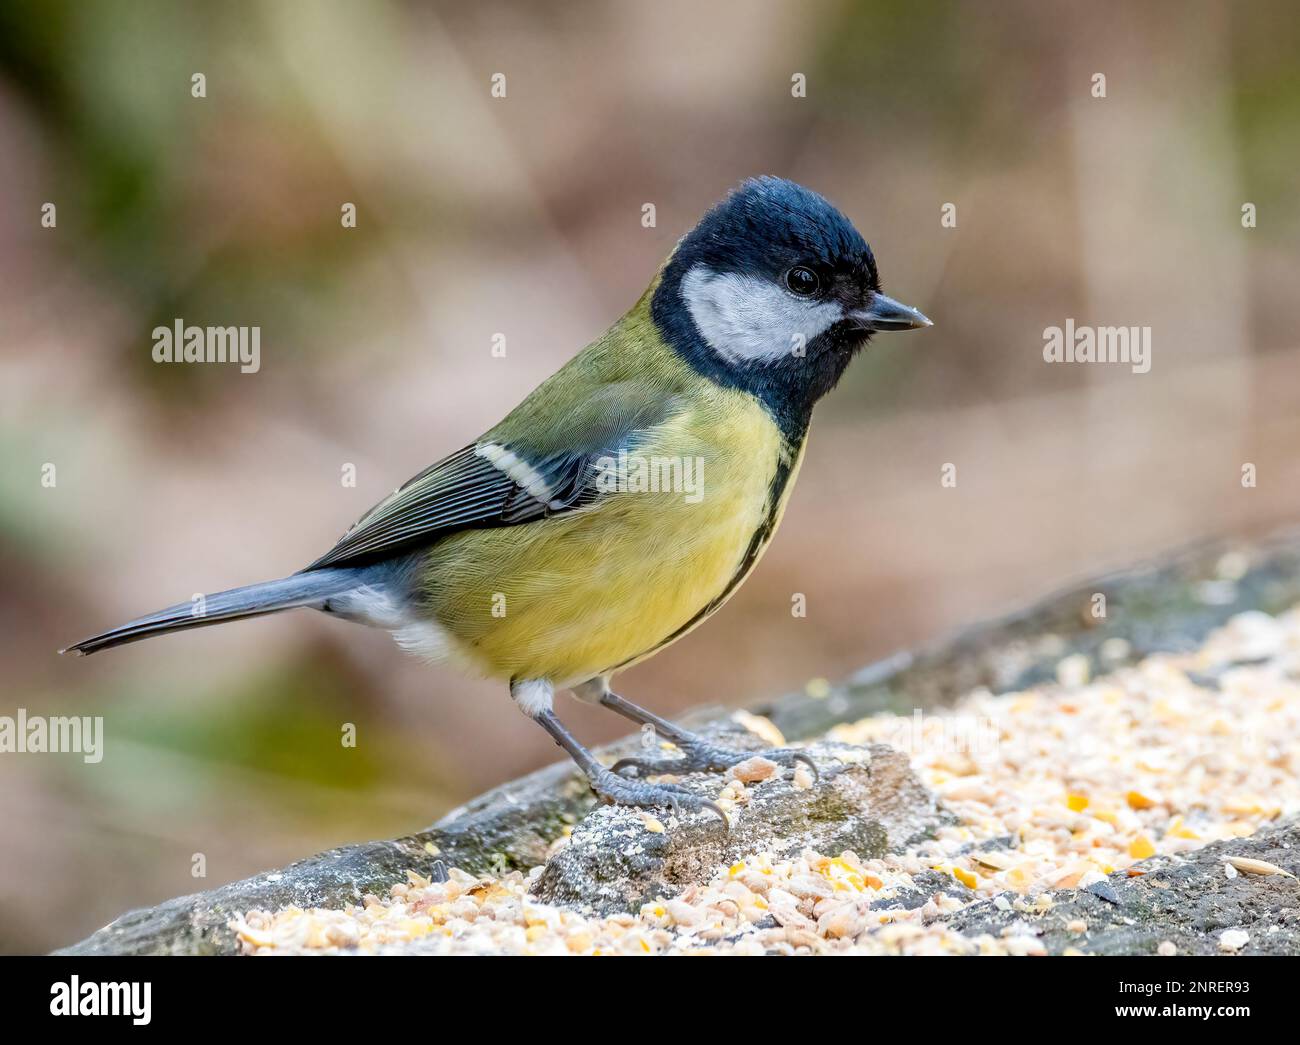 Blue Tit, (Cyanistes caeruleus), feeding from seed placed on an old log Stock Photo